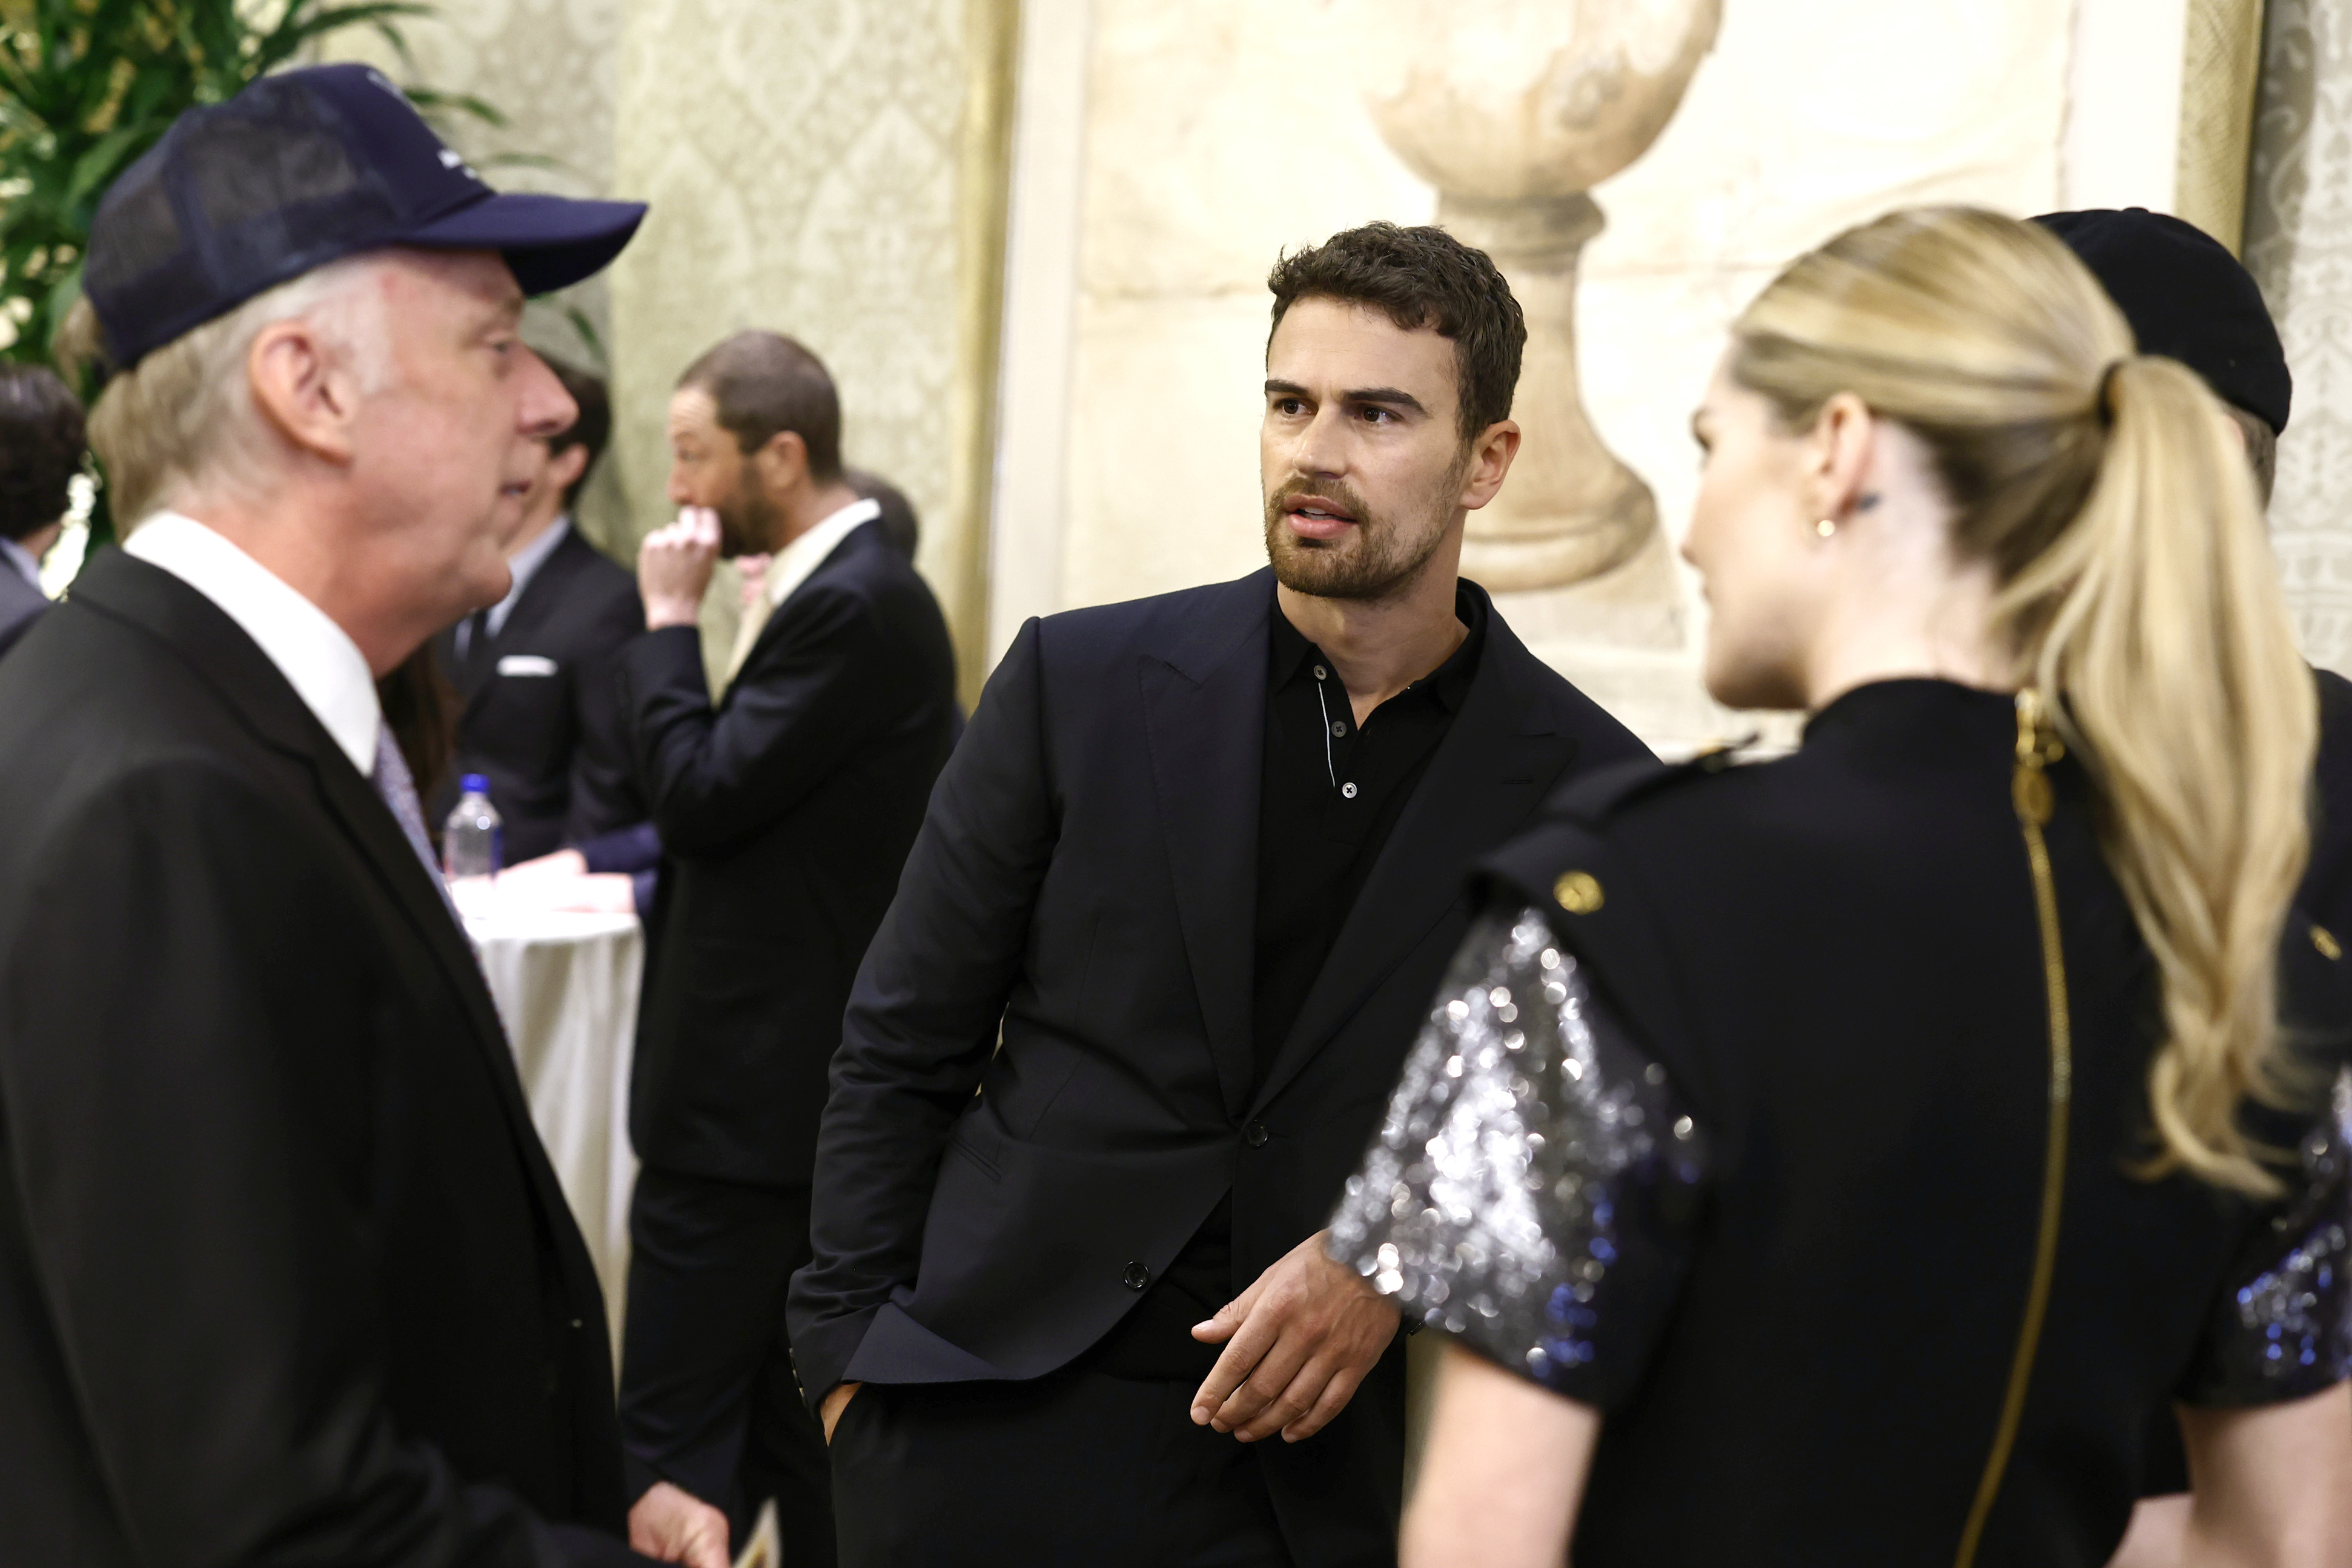 Mike White, Theo James, and Meghann Fahy at an event